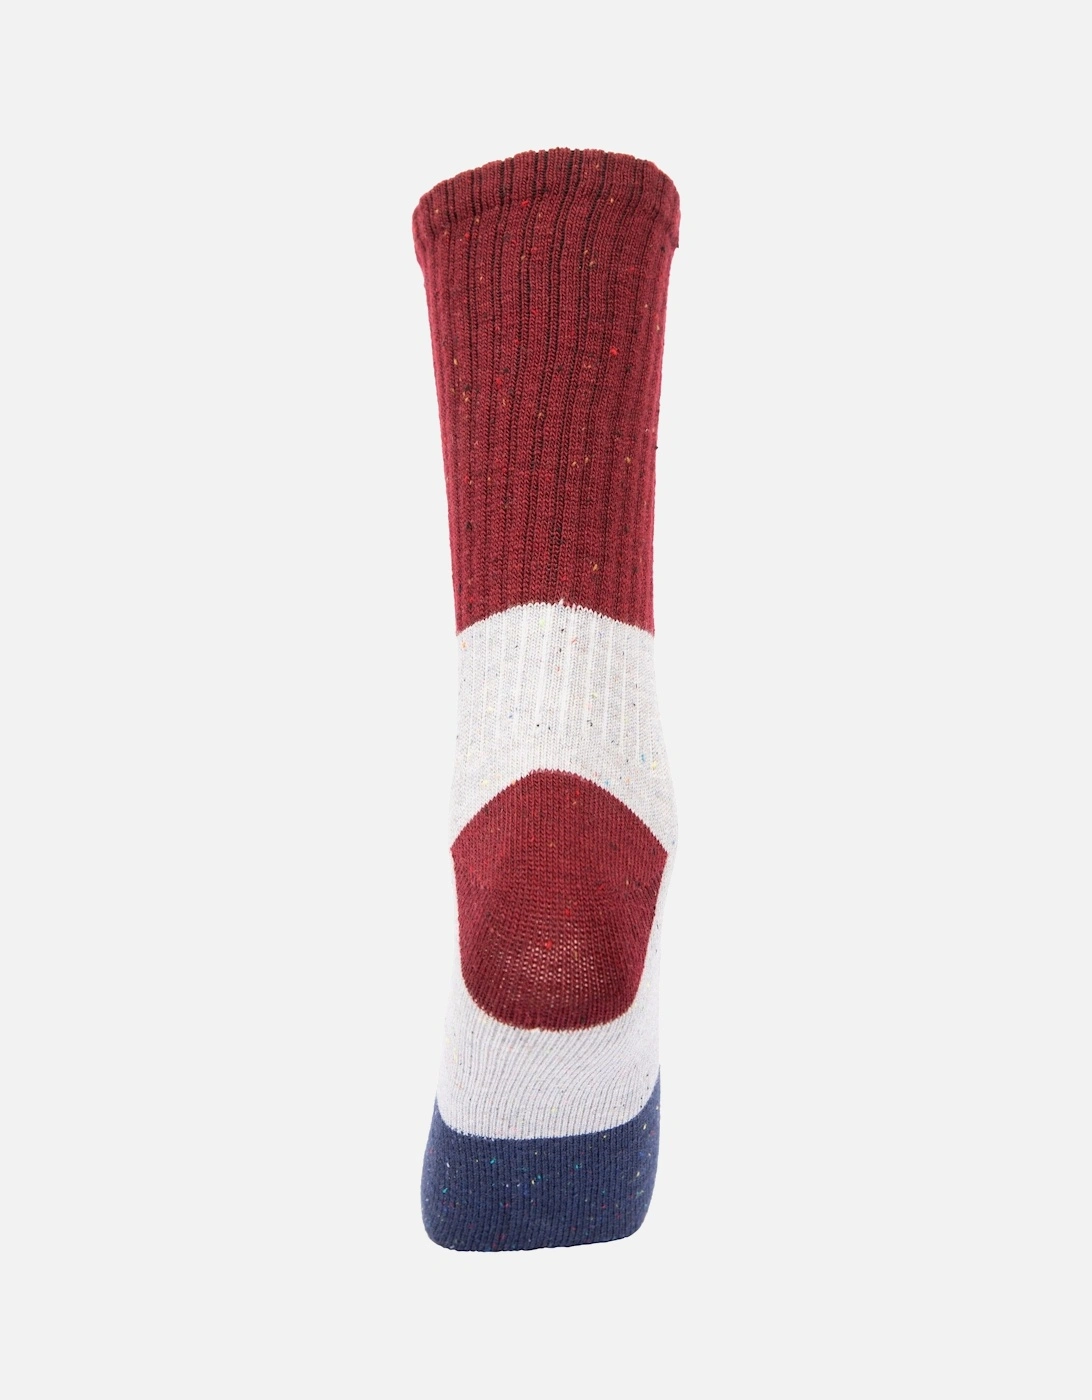 Unisex Adult Alize Recycled Boot Socks